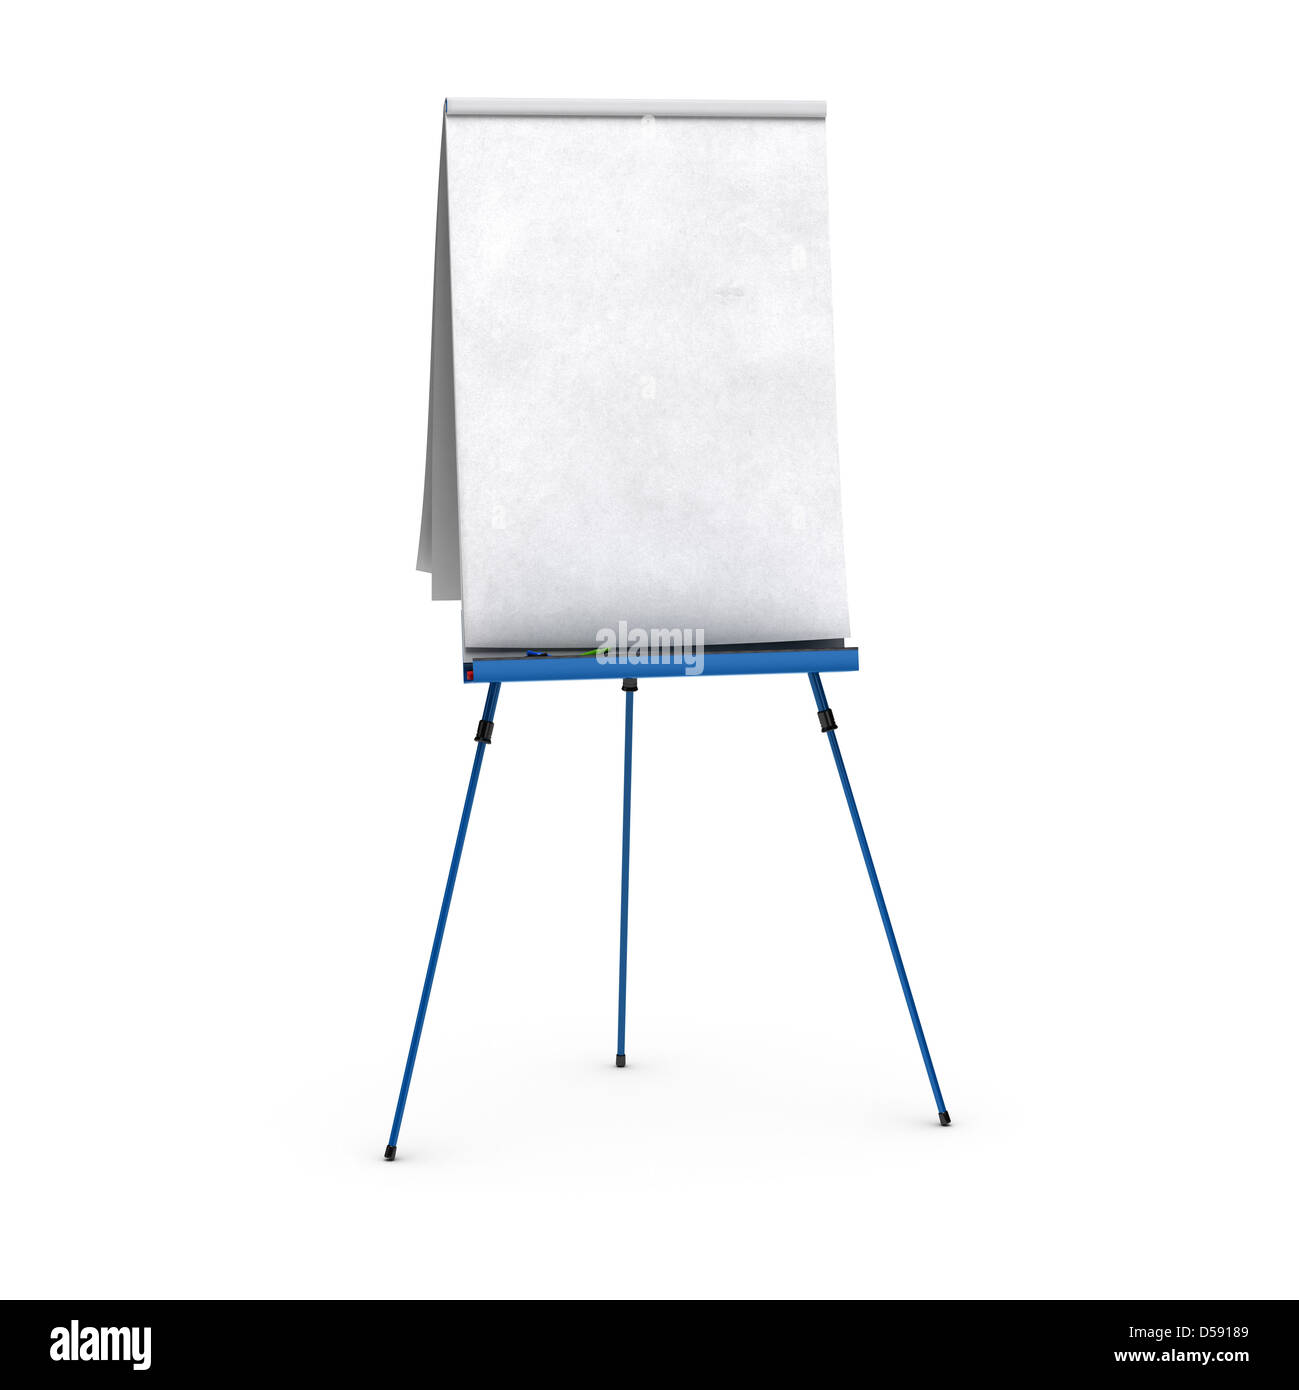 blank flipchart over white background view of the front side, with red, blue, and green pens, small shadows at the bottom Stock Photo